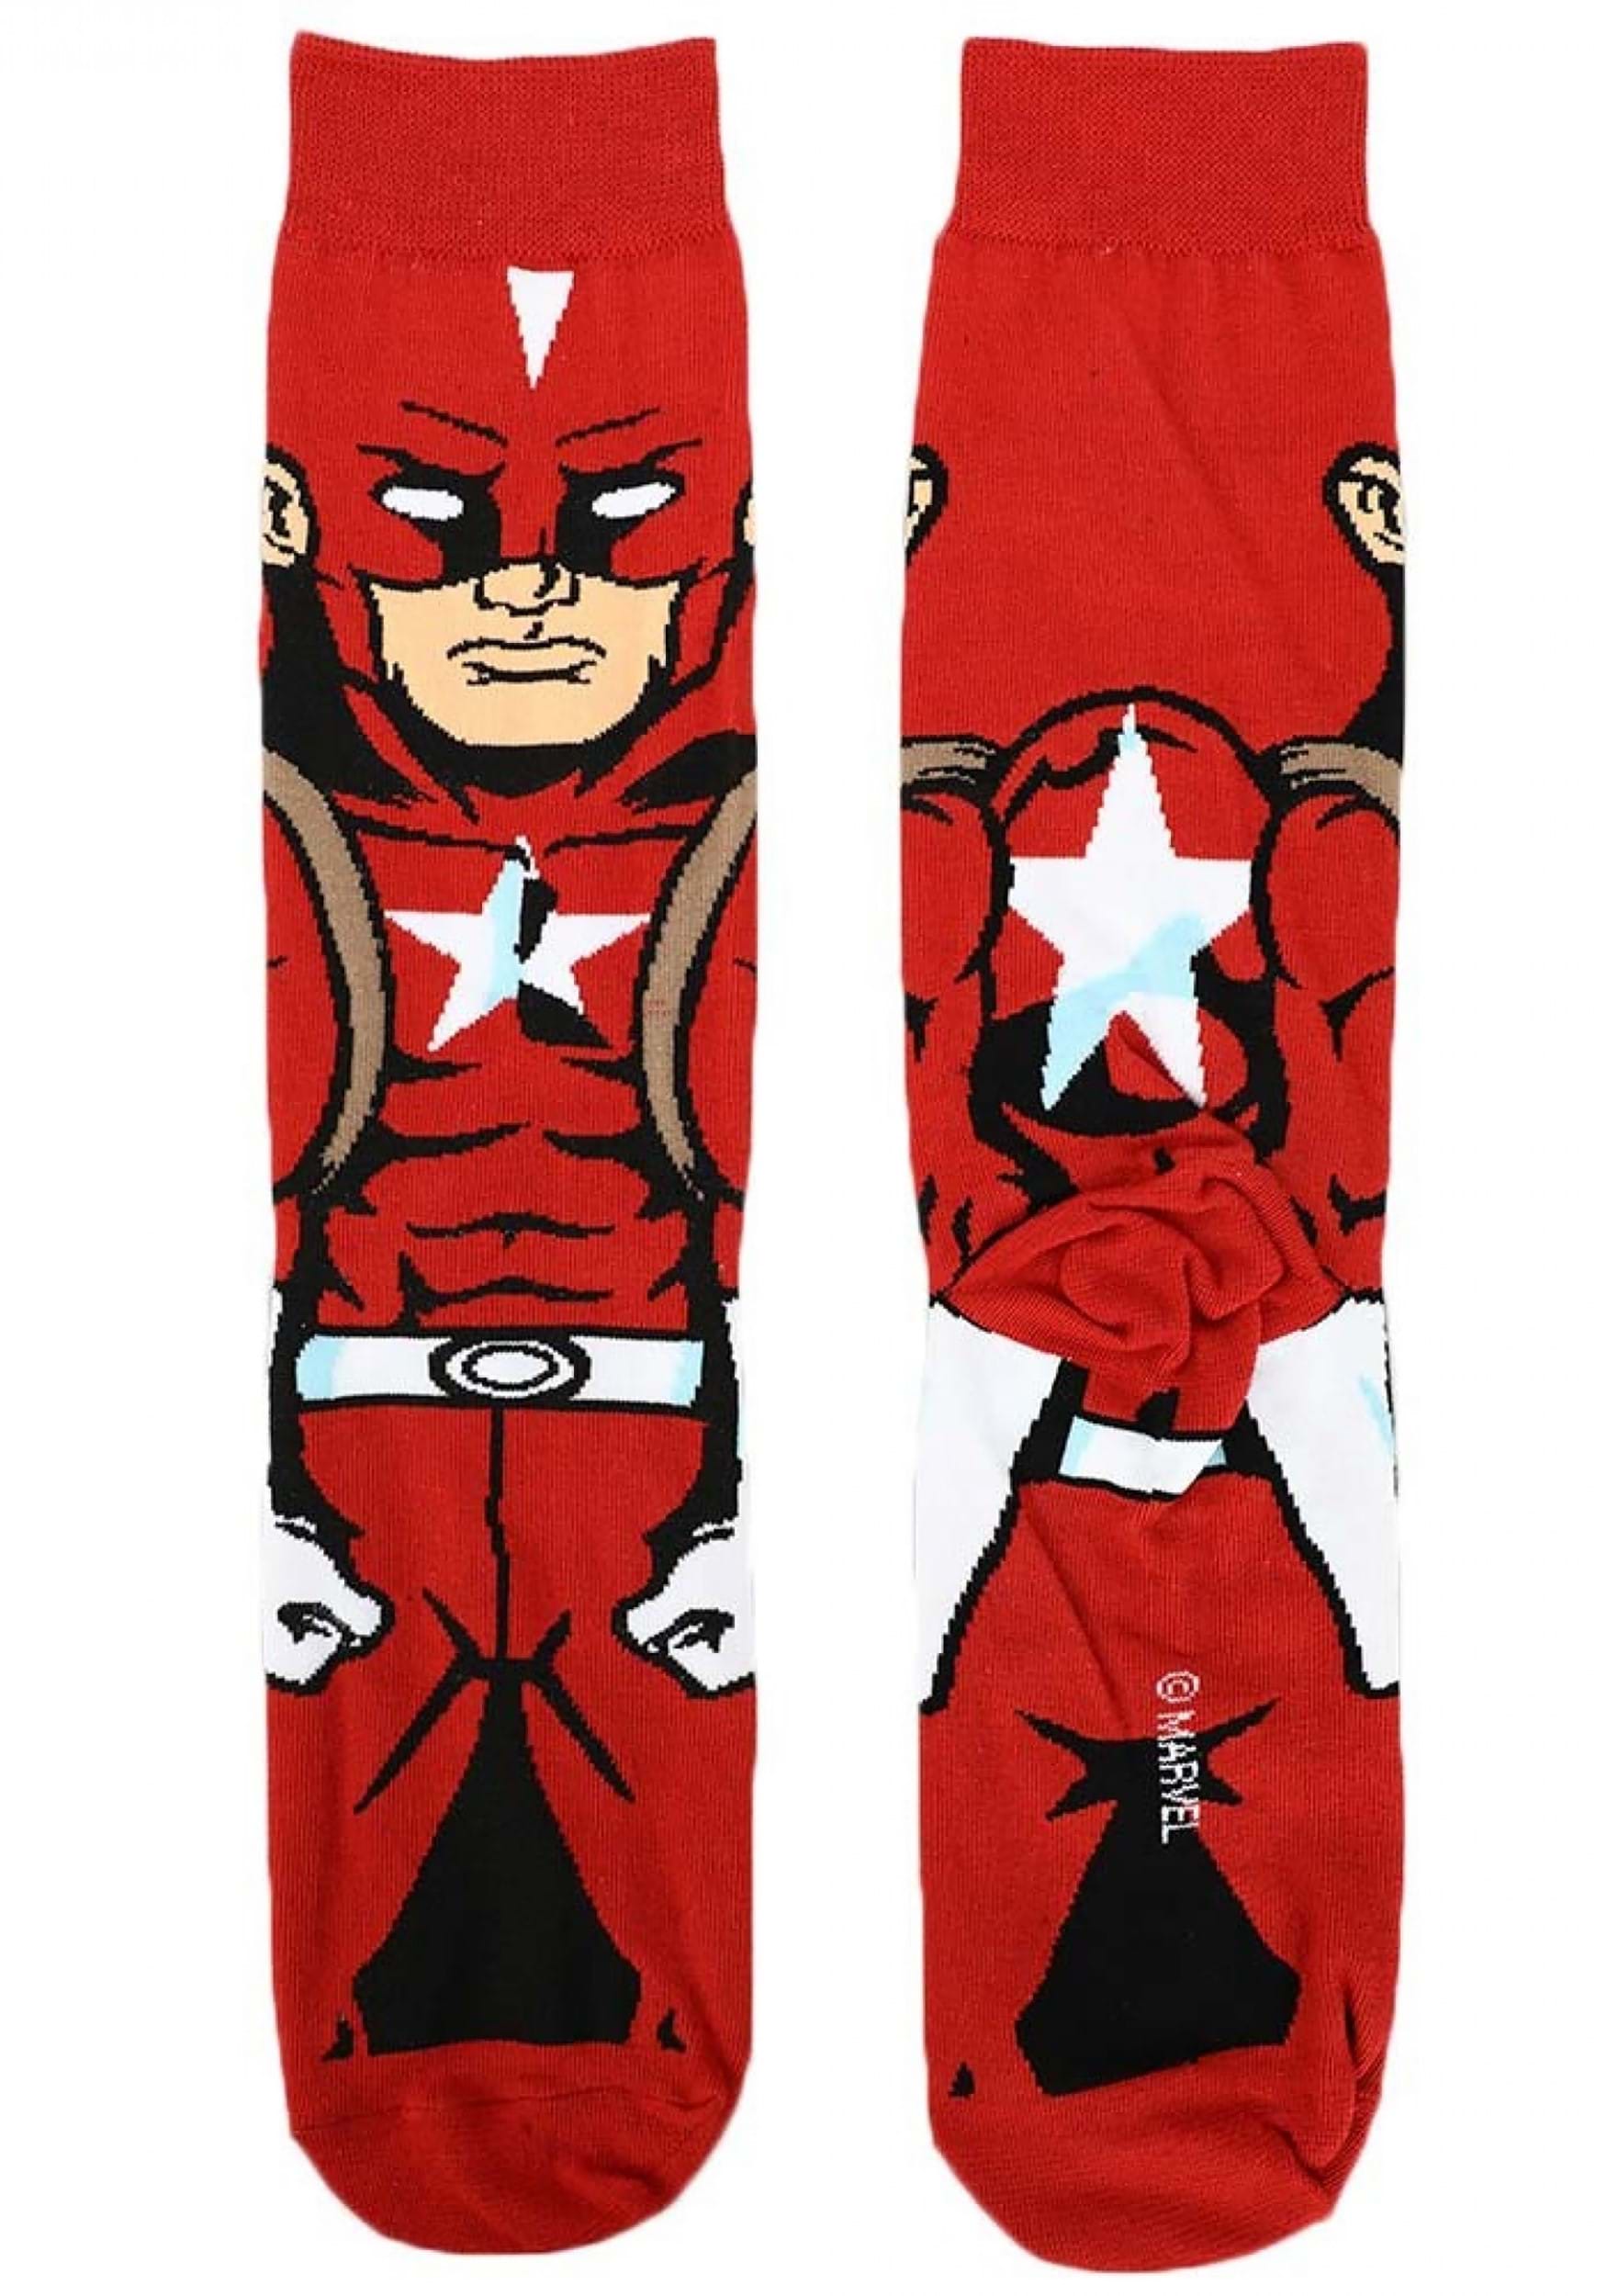 https://images.fun.com/products/75689/2-1-183774/marvel-black-widow-red-guardian-360-character-socks-alt-1-up.jpg